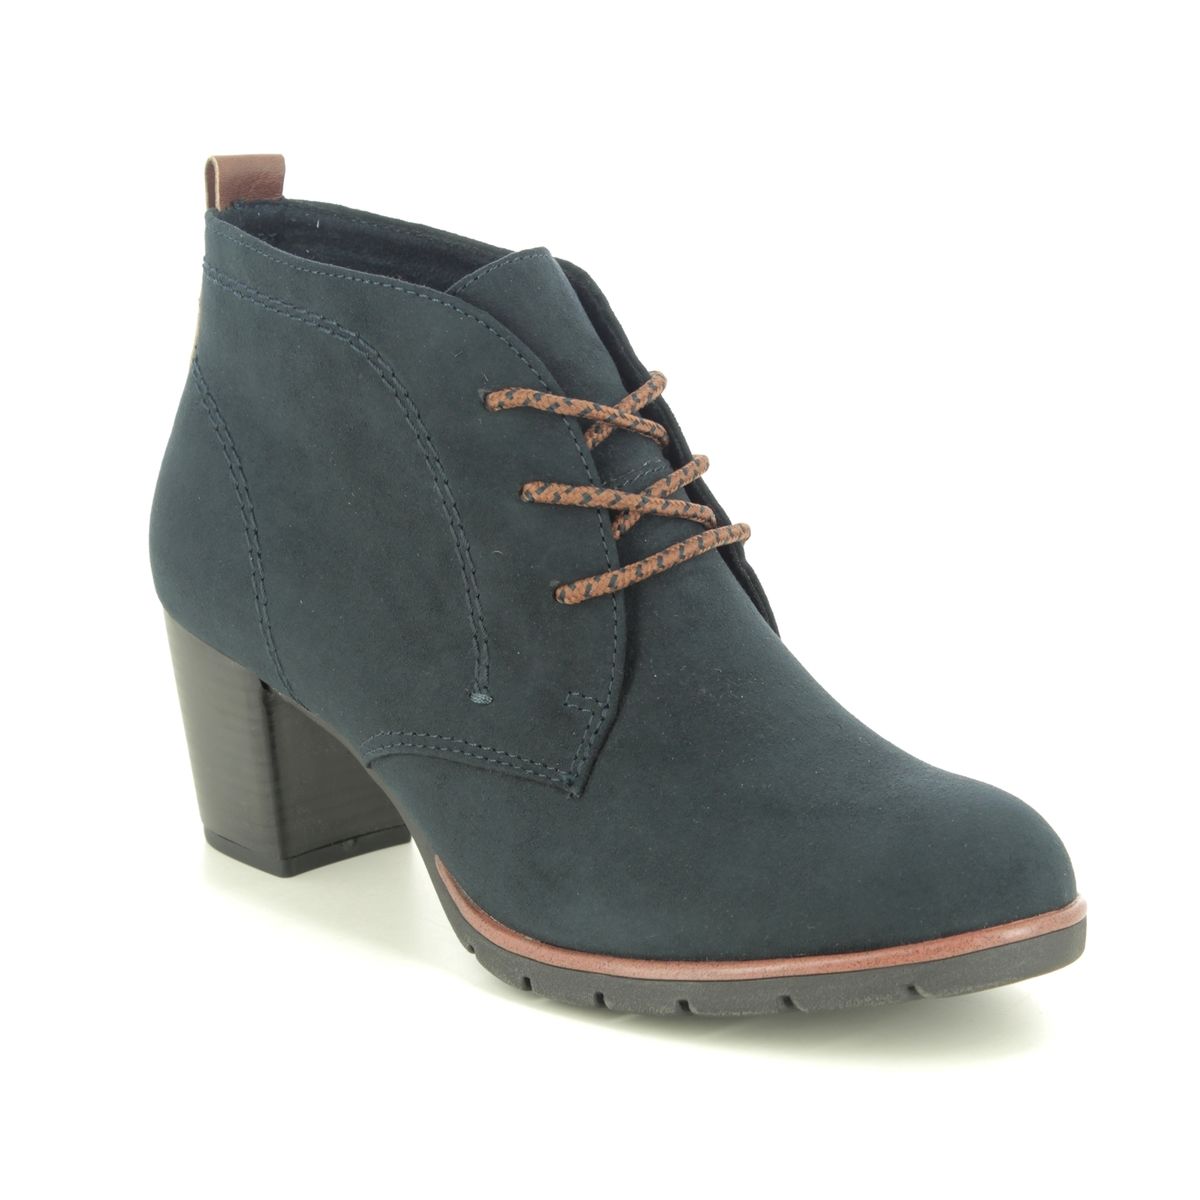 Pesalow 25107-35-888 Navy Lace Up Boots